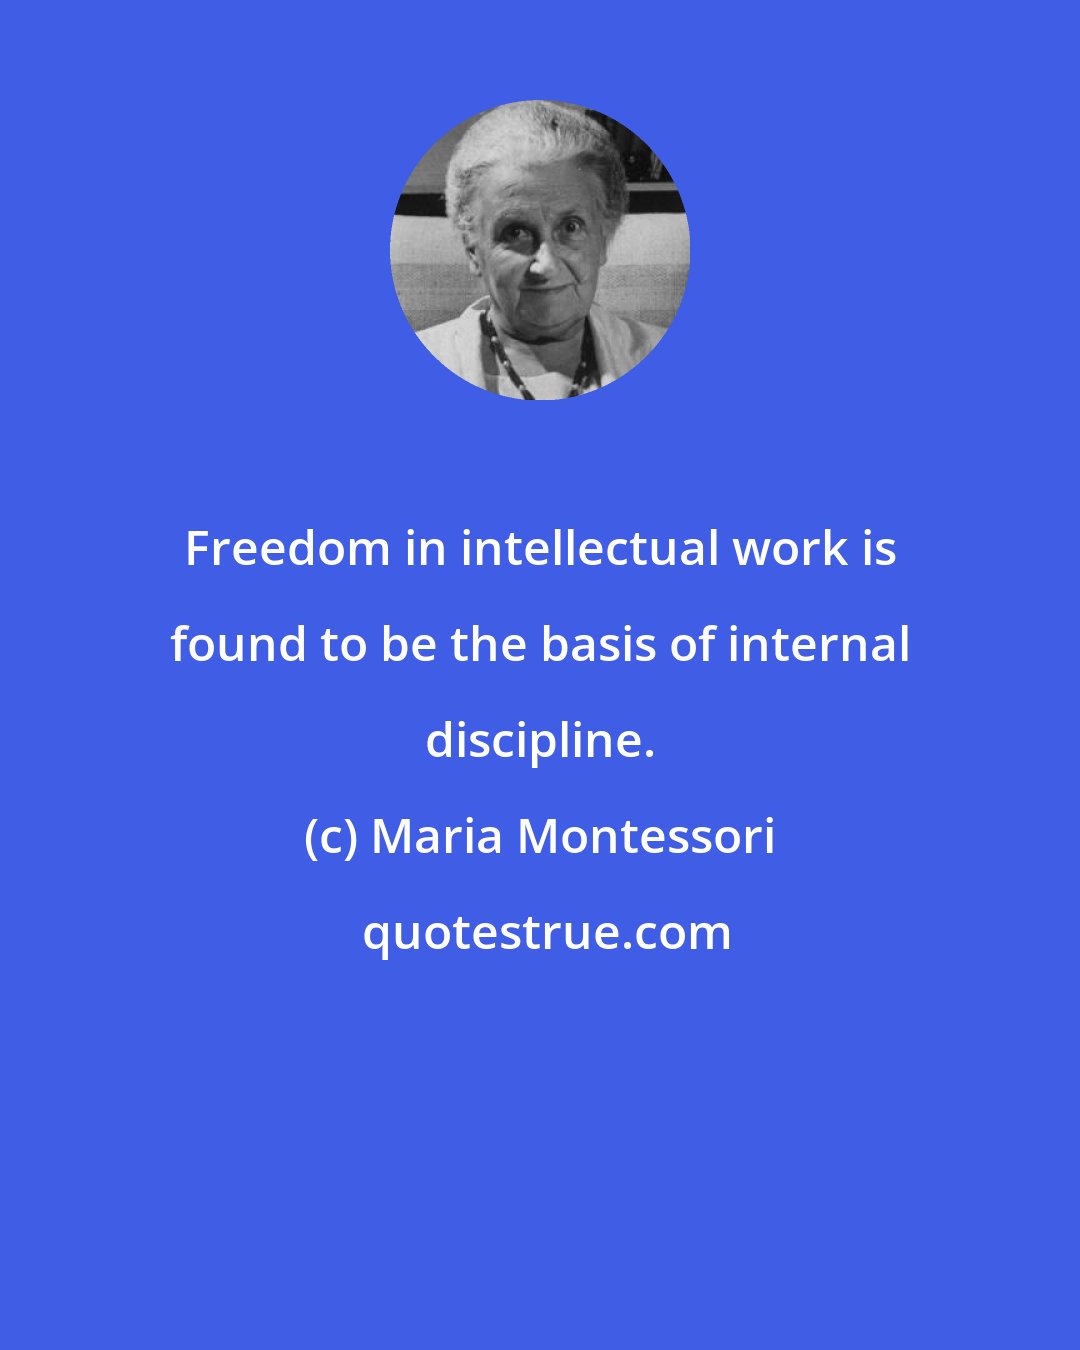 Maria Montessori: Freedom in intellectual work is found to be the basis of internal discipline.